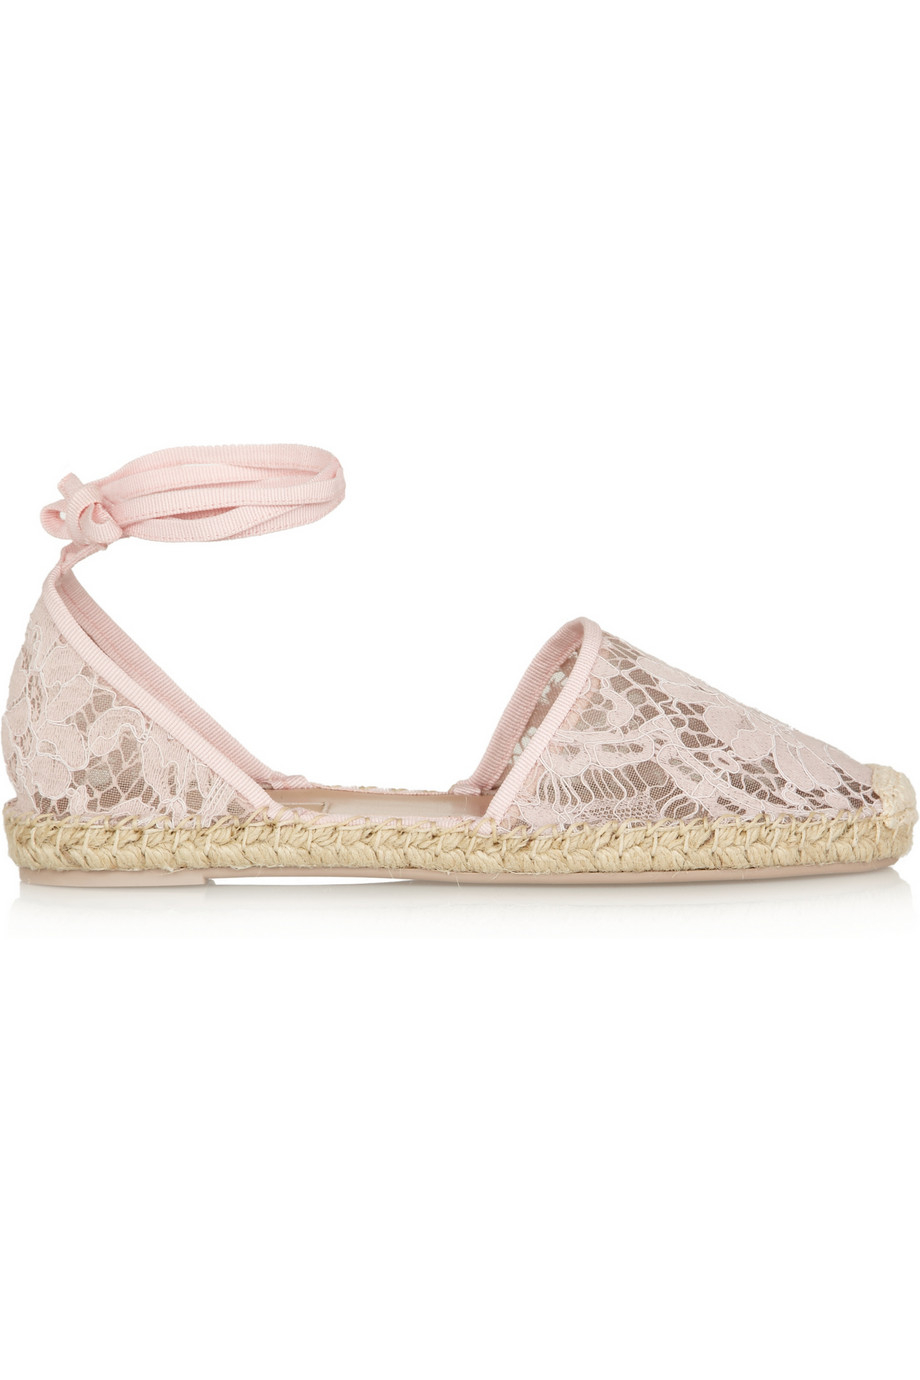 Valentino Lace Espadrilles in Pink | Lyst